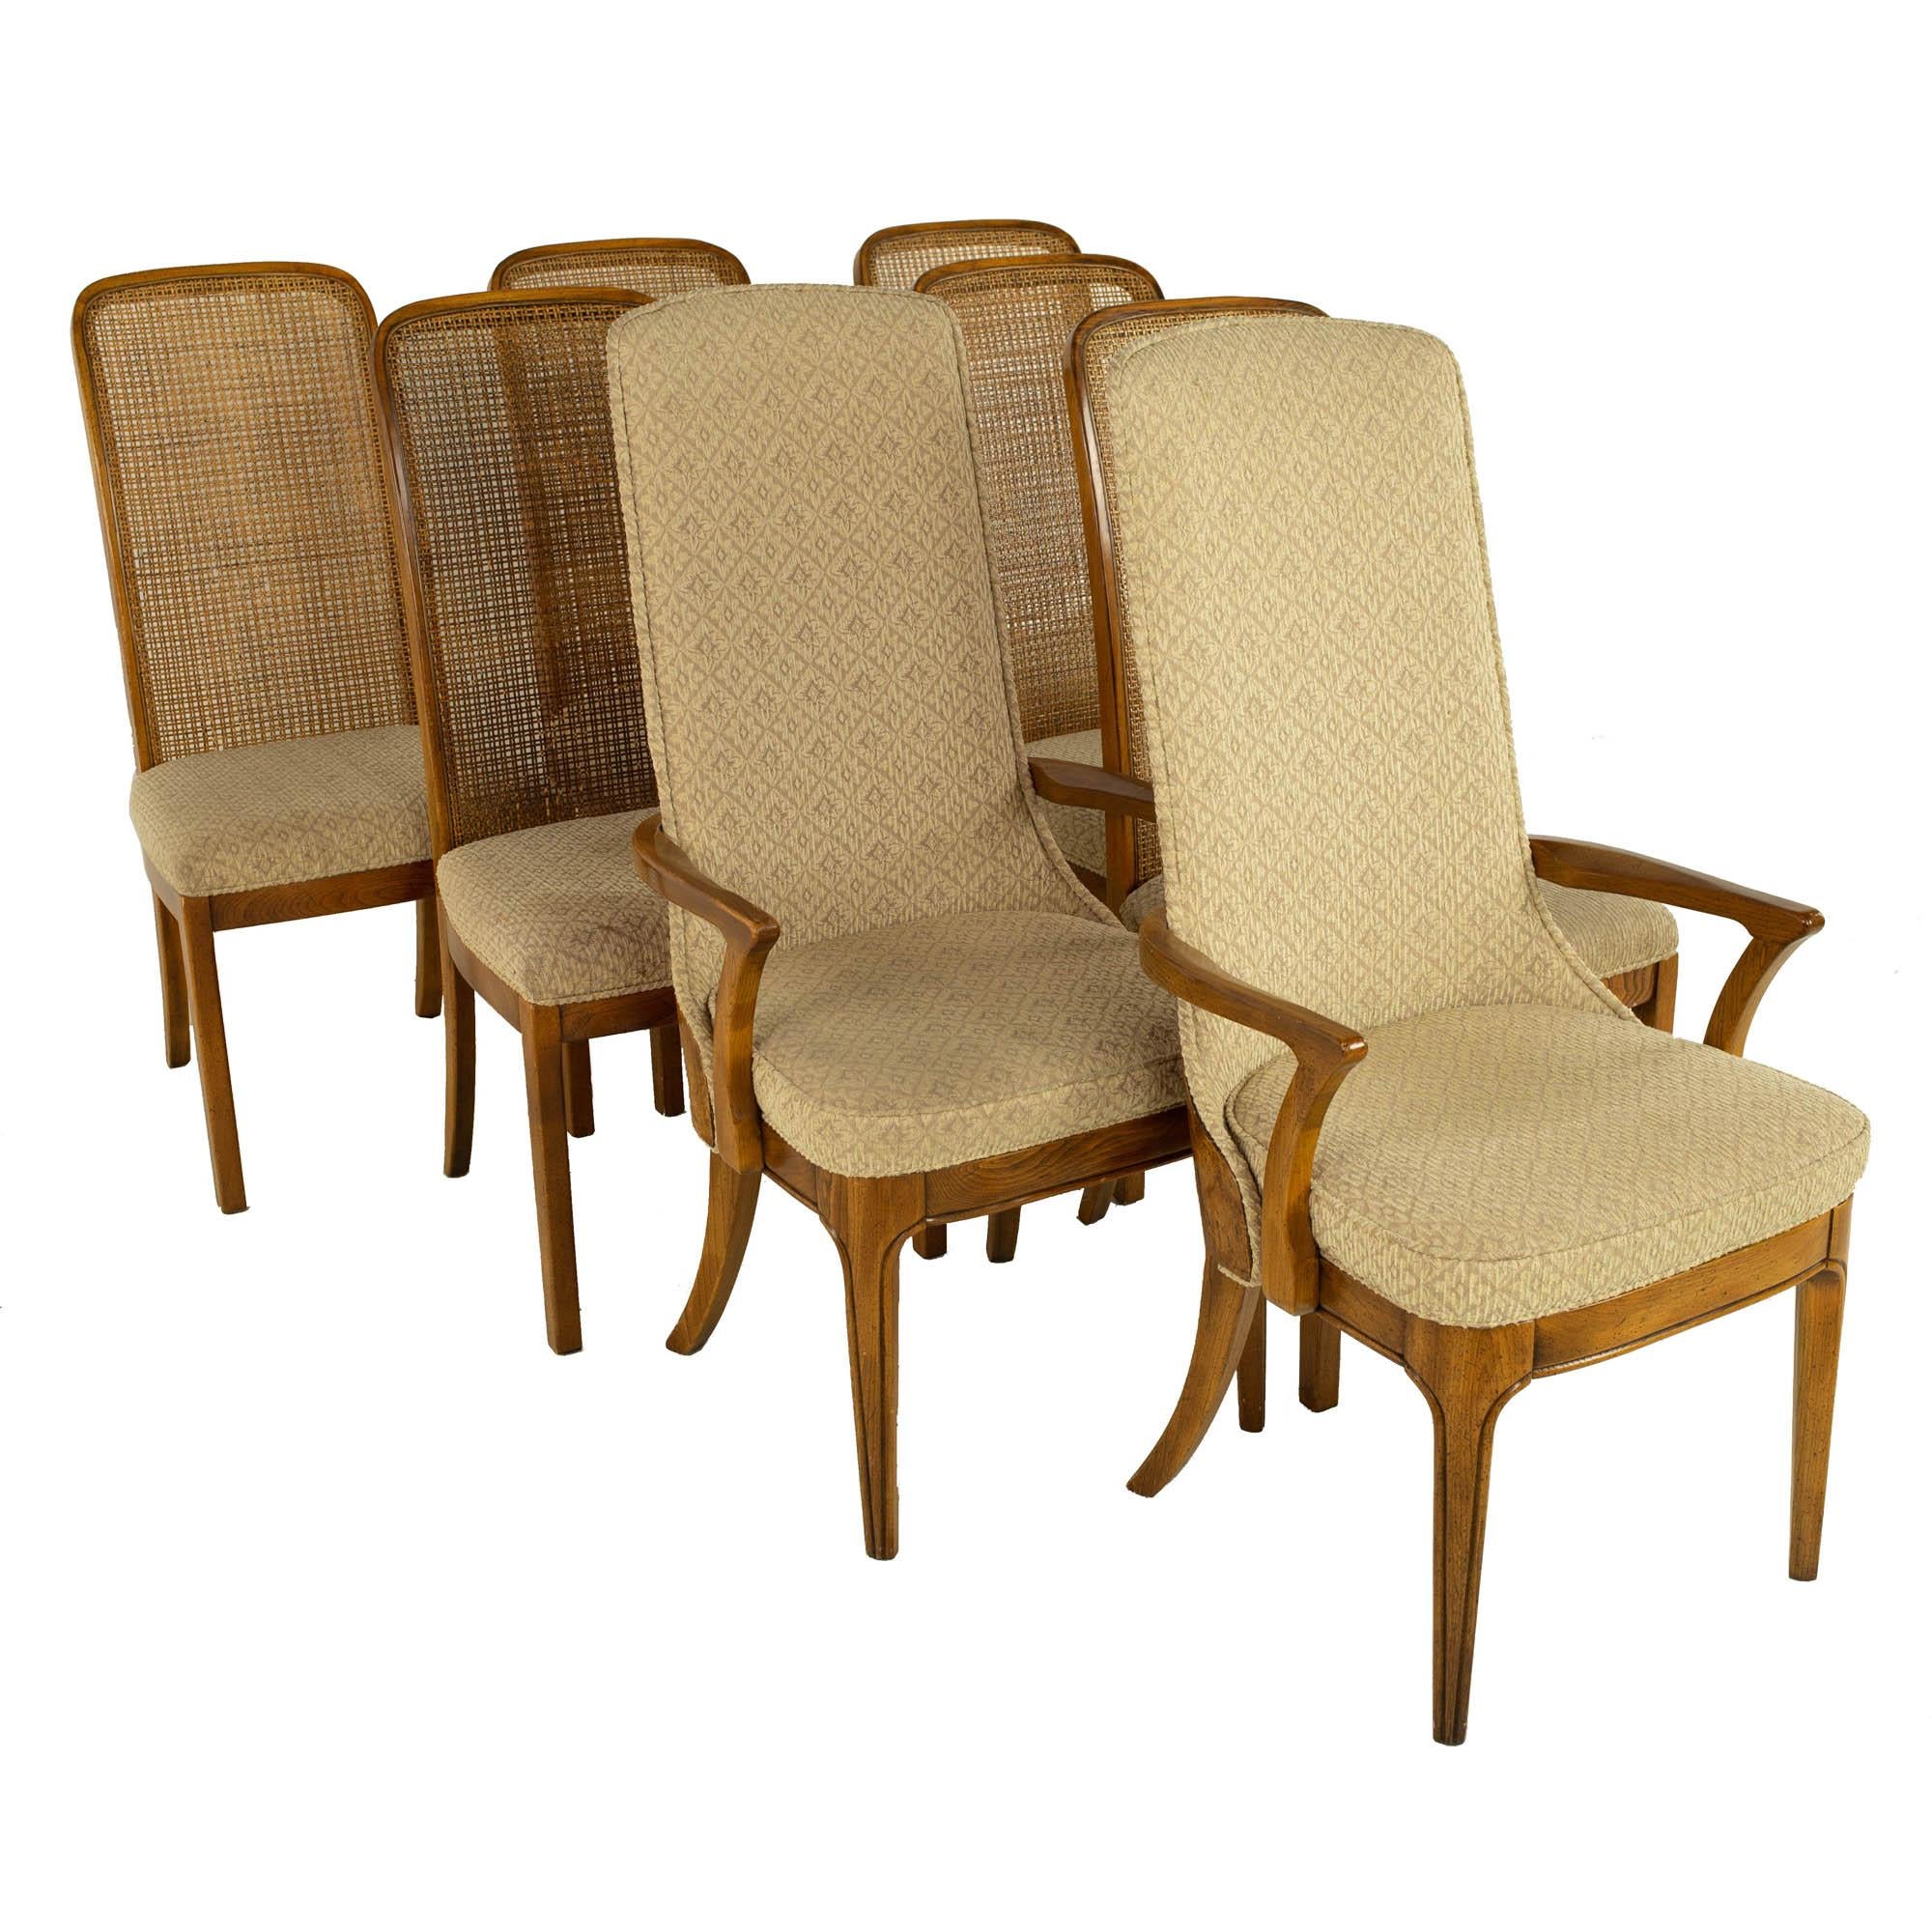 American Hickory Manufacturing Company Mid Century Burlwood Cane Dining Chairs, Set 10